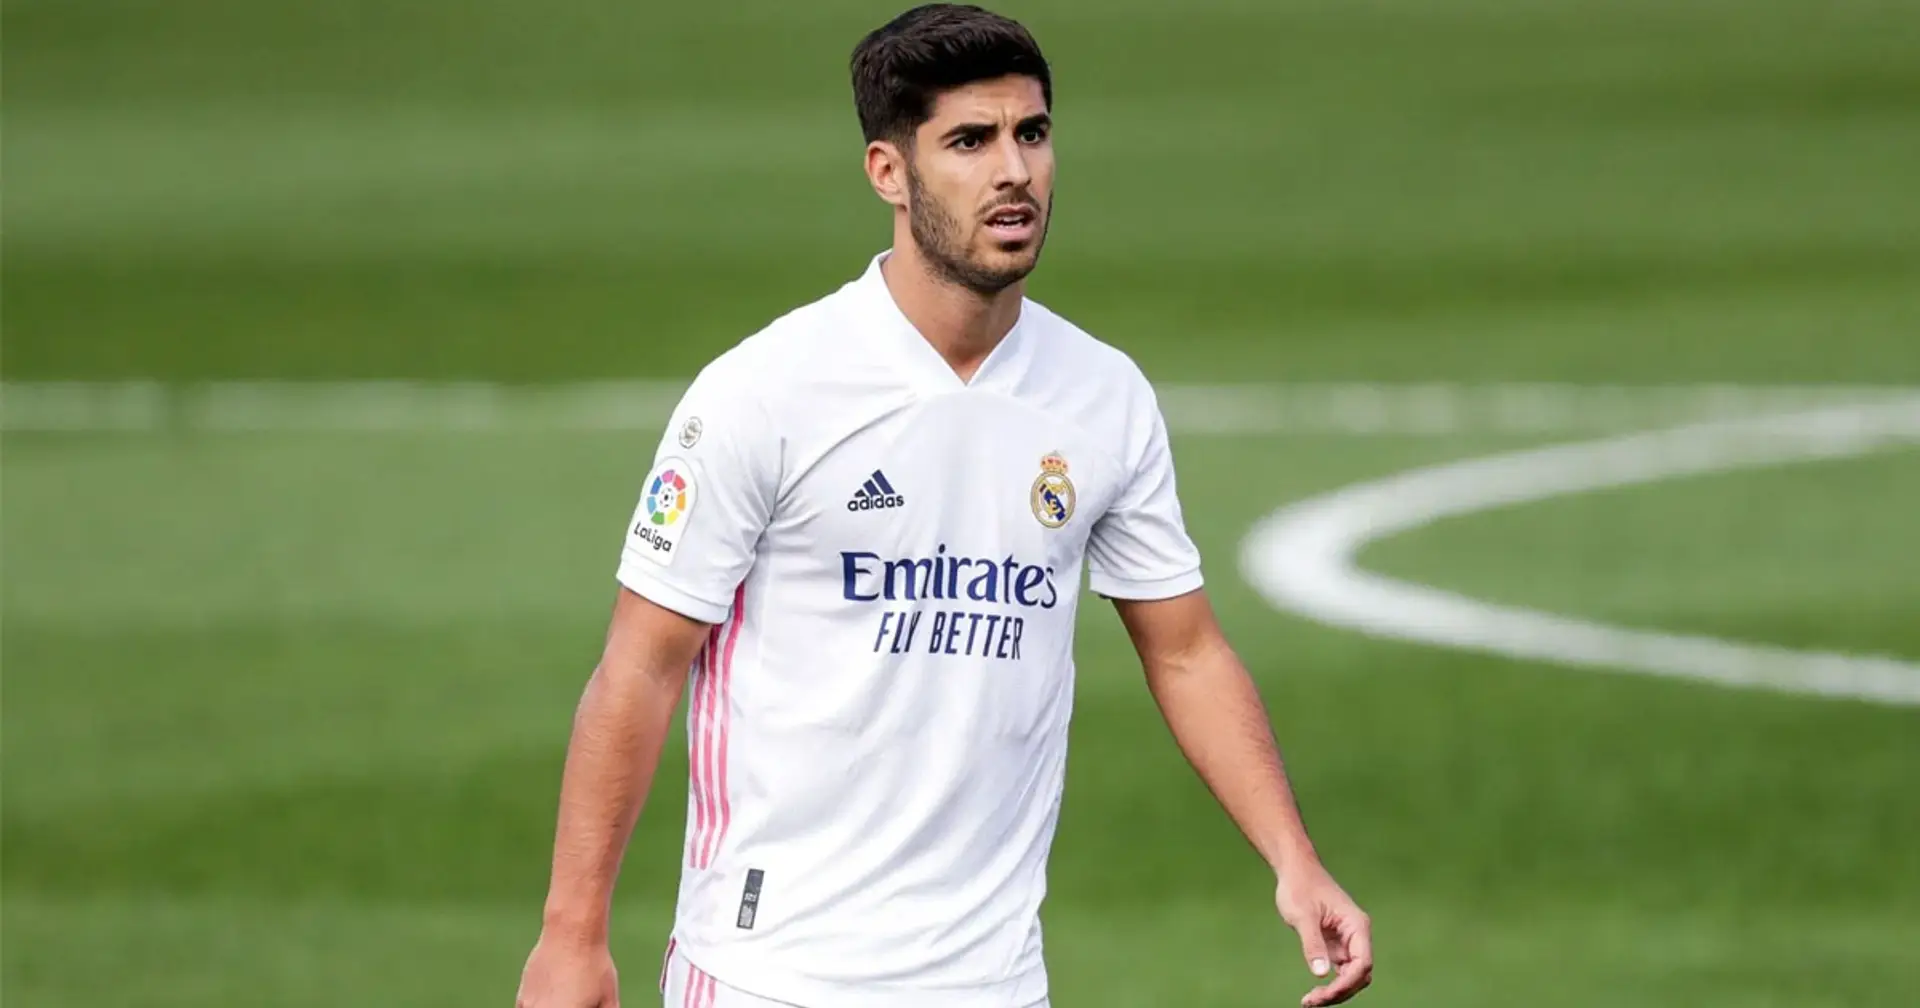 Asensio replaces injured Ansu Fati in Spain squad for upcoming games